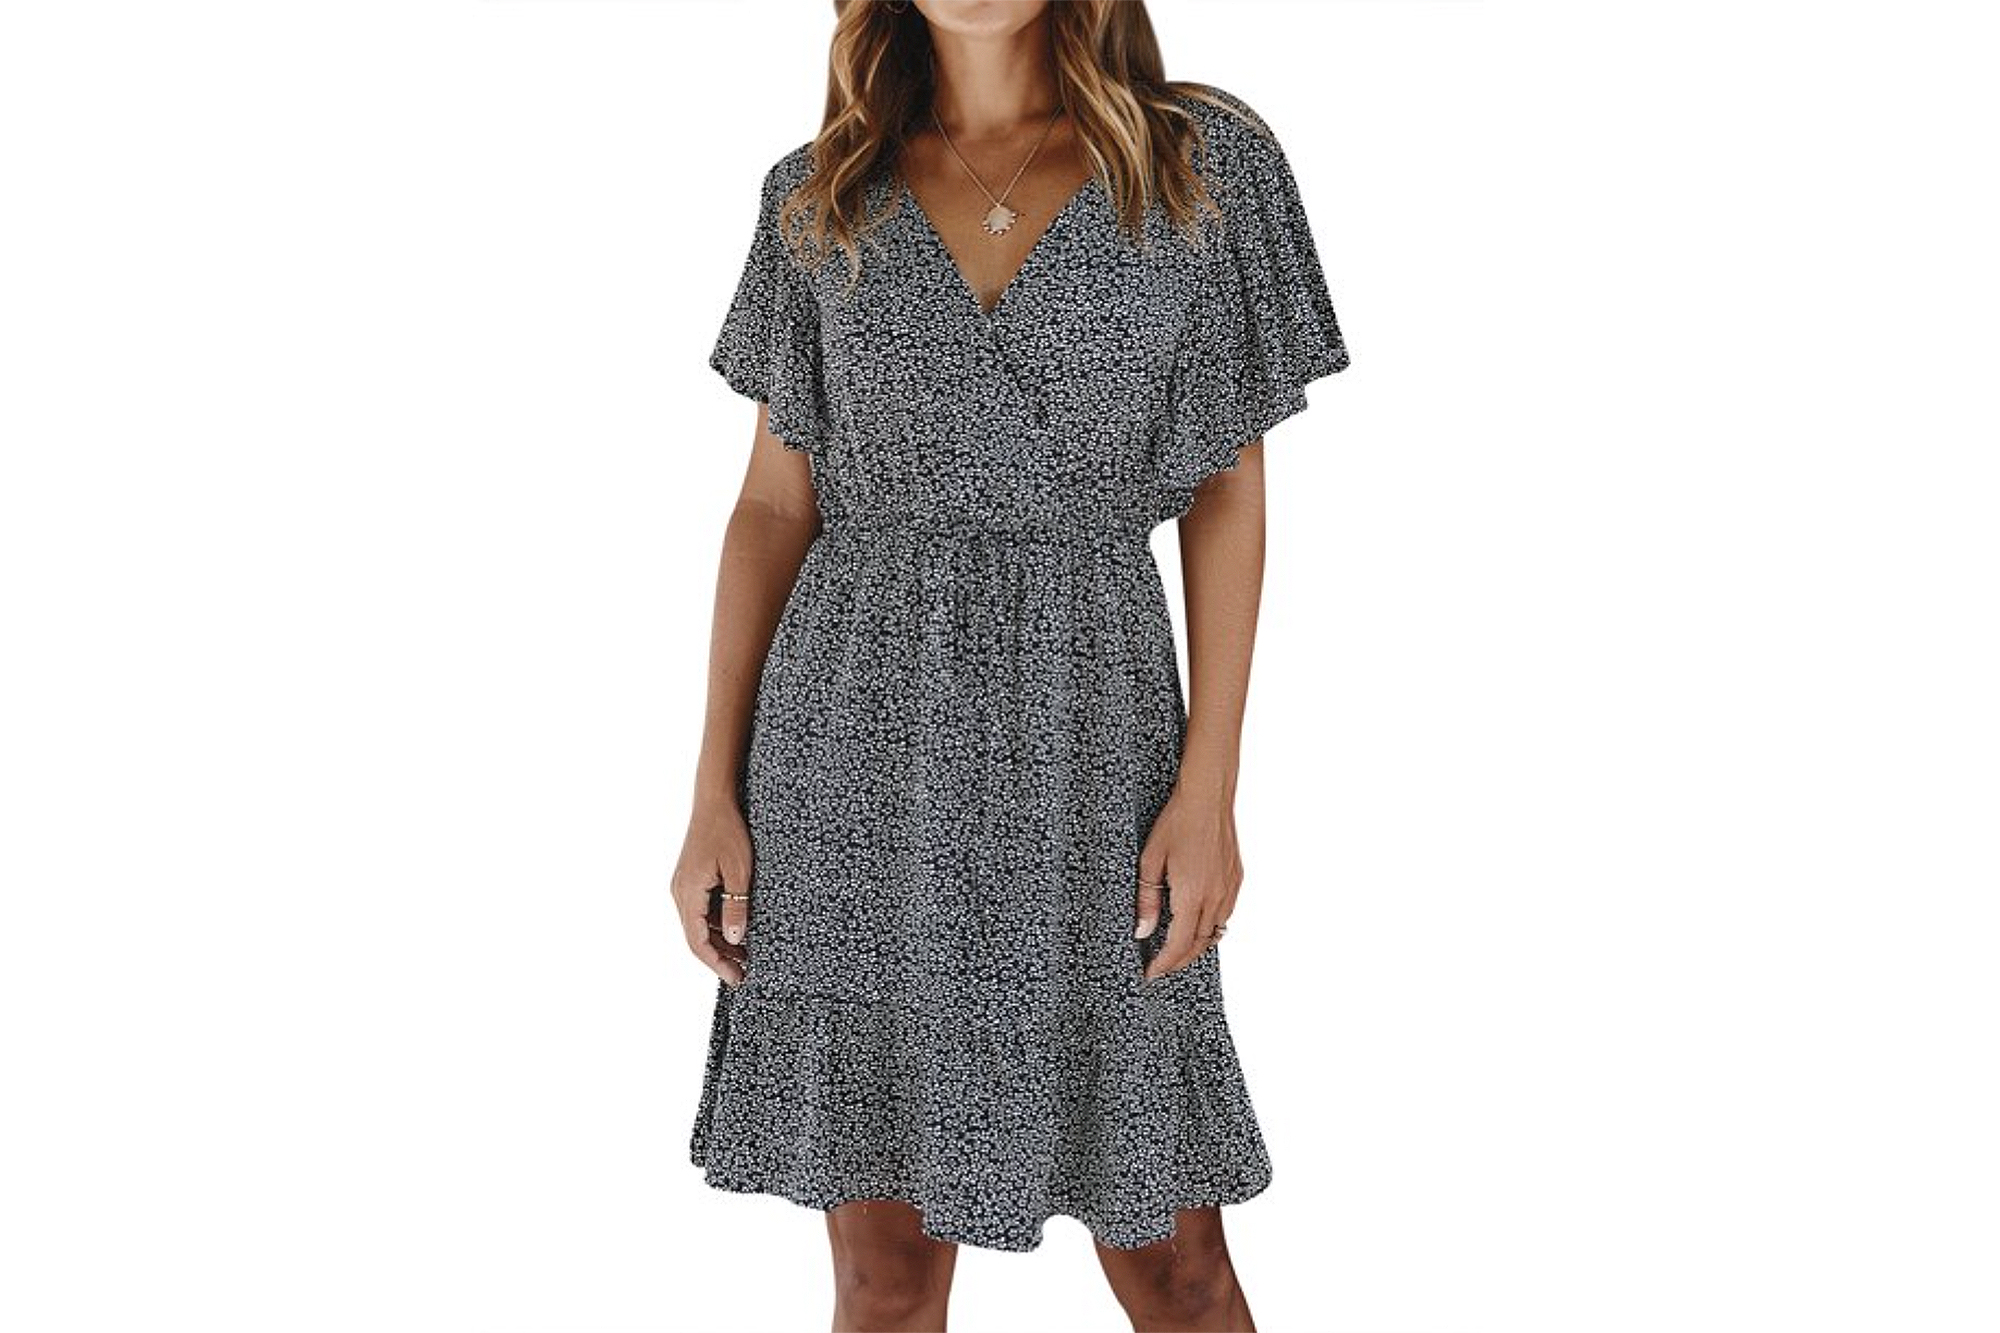 Walmart Has the Quintessential Spring Dress That We All Want To Wear